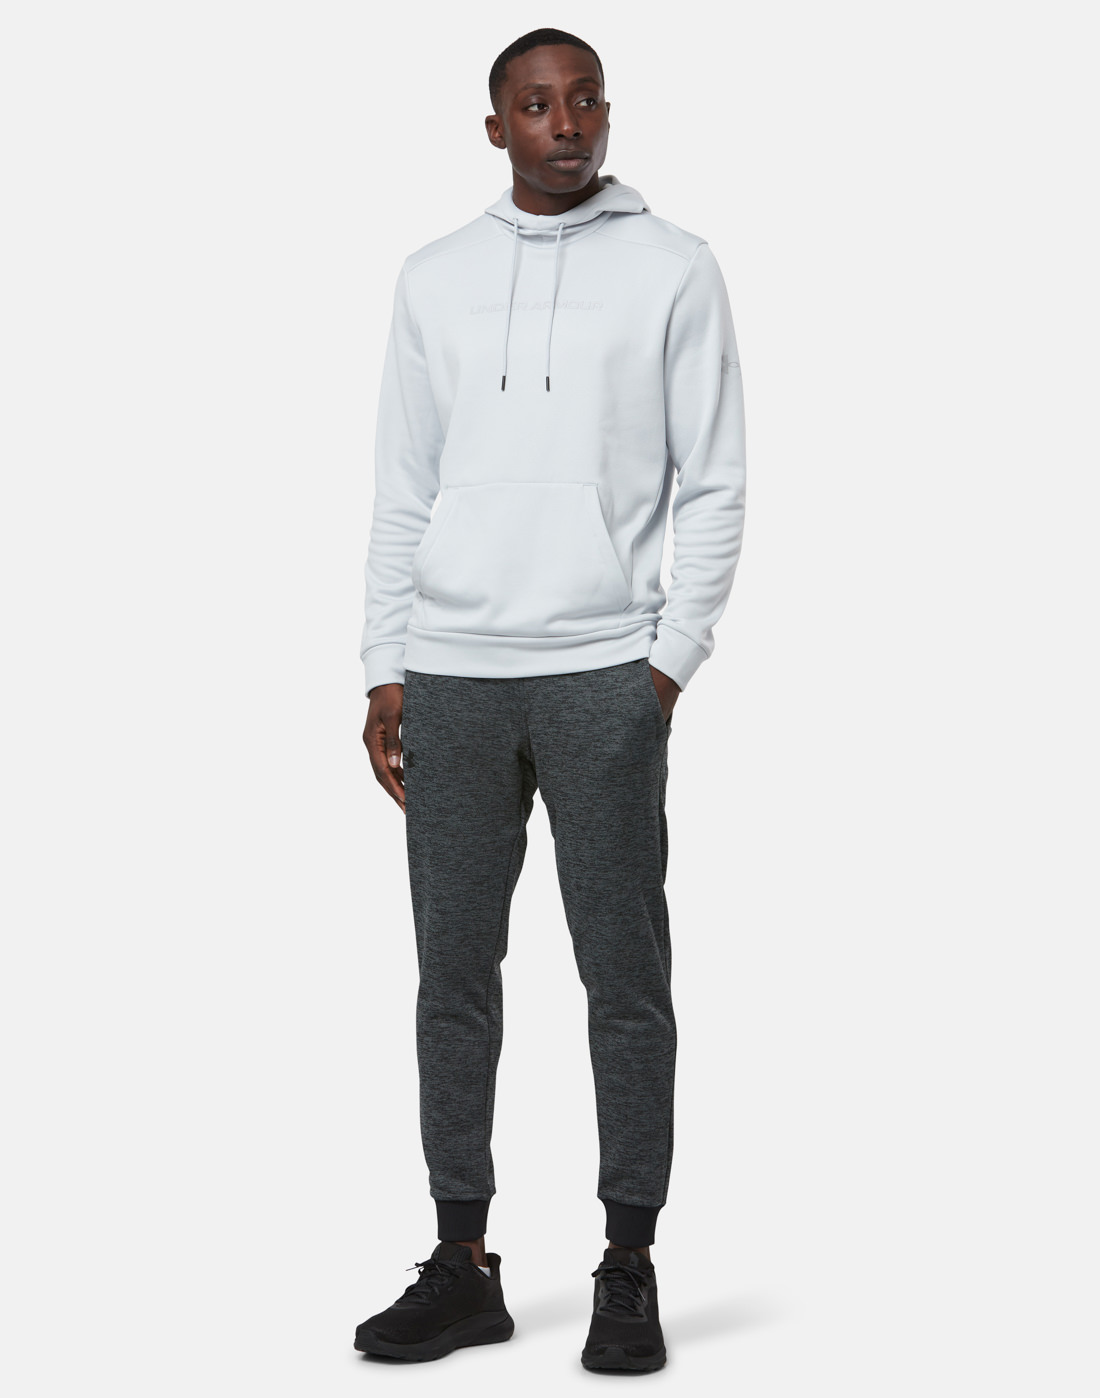 Under Armour Mens Armour Fleece Graphic Hoodie - Grey | Life Style ...